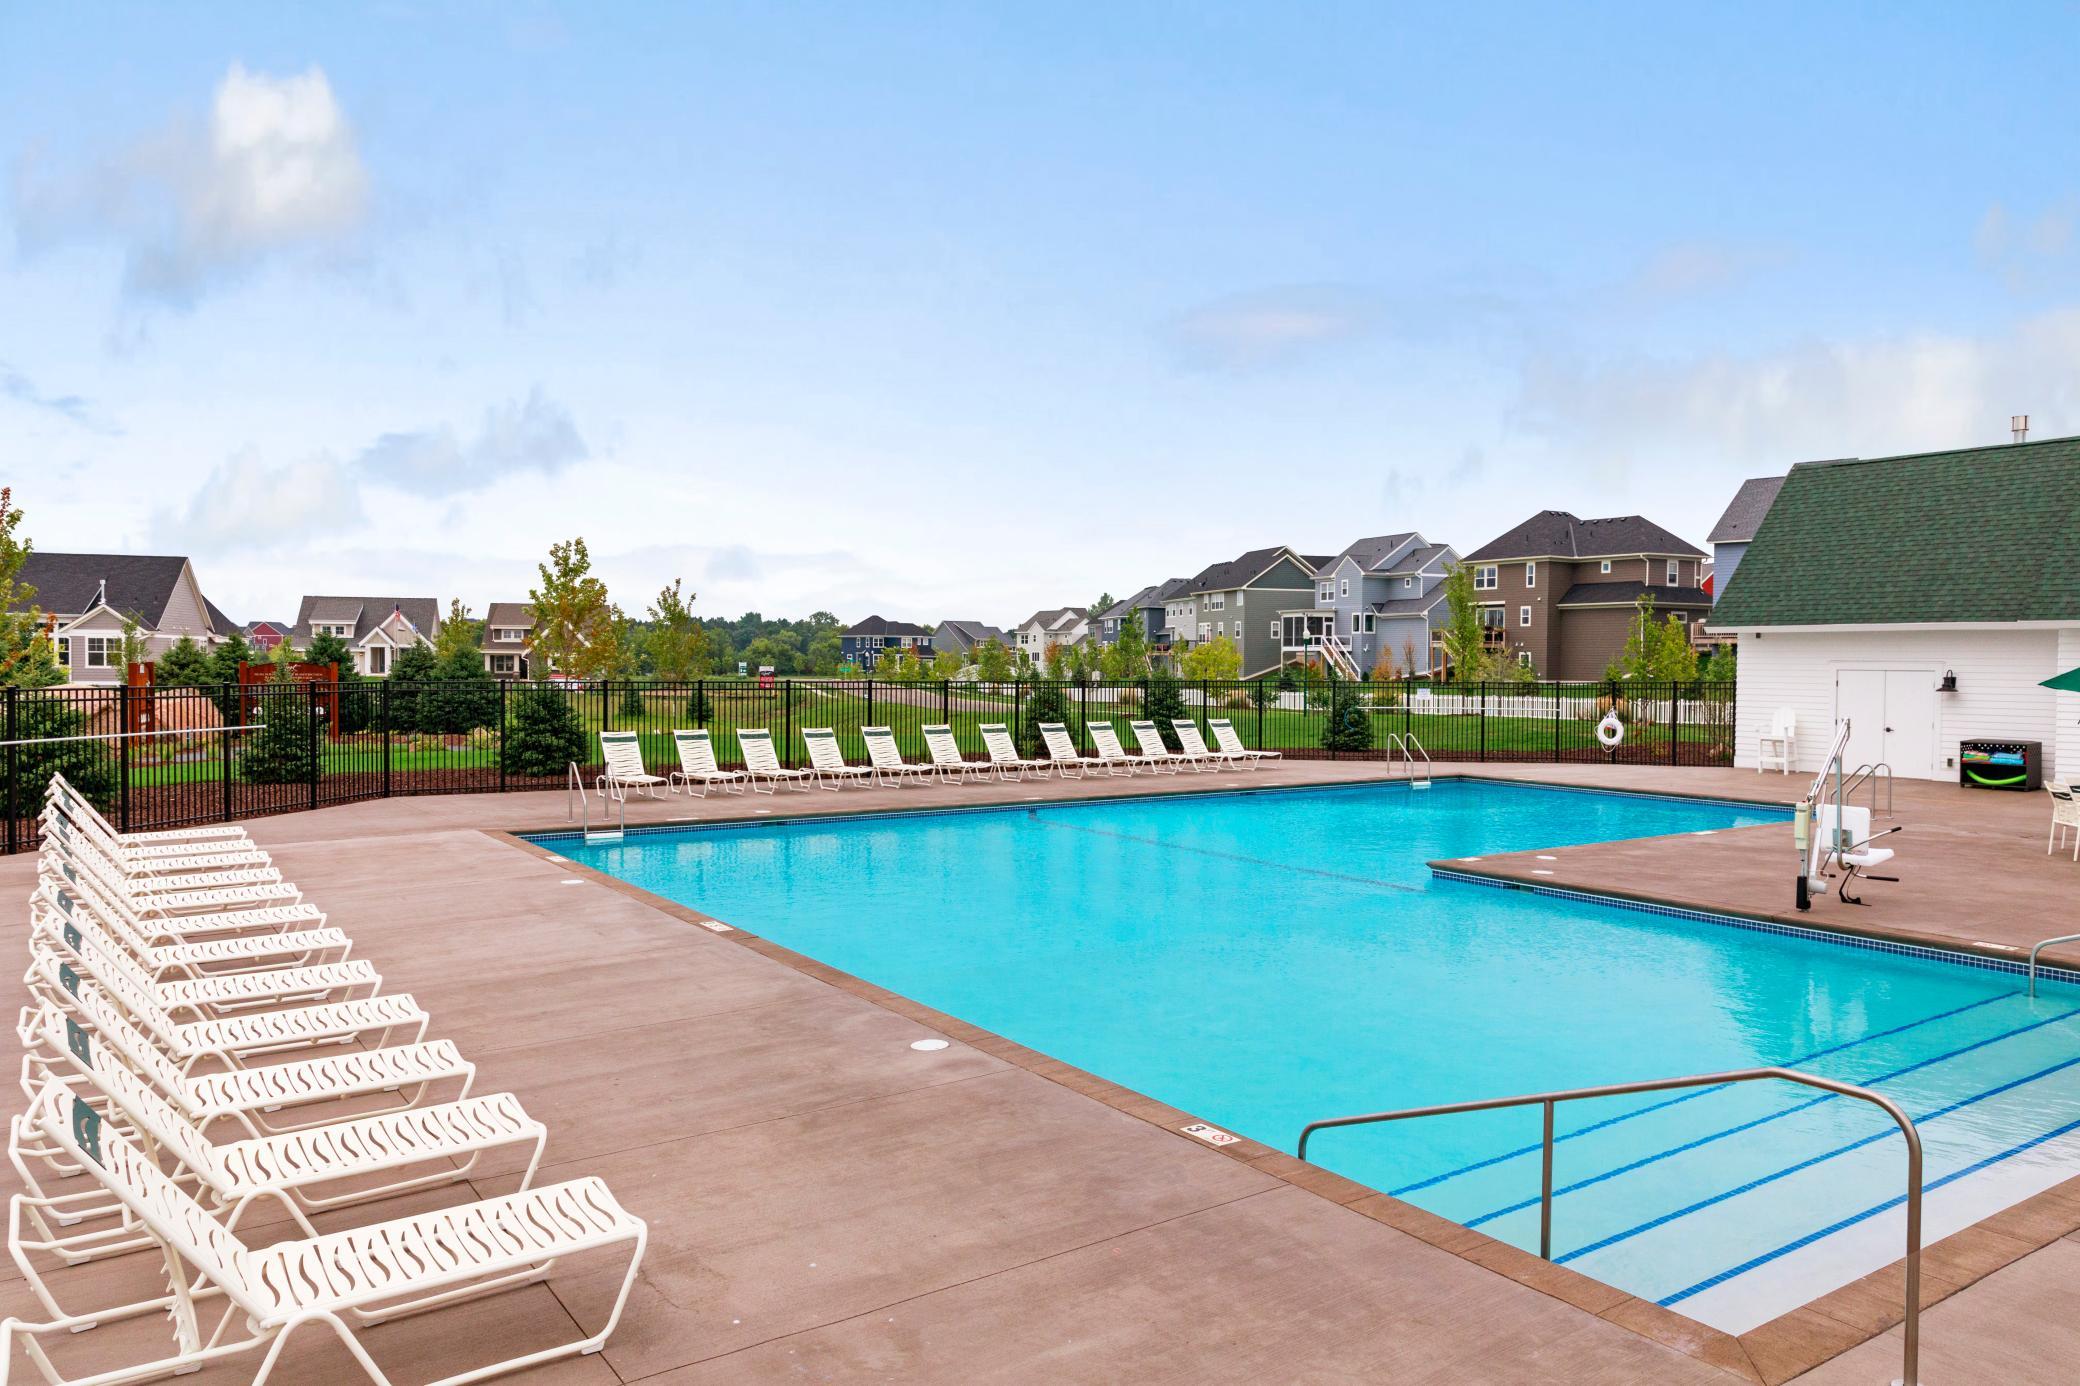 Spirit of Brandtjen offers a lifestyle! Amazing amenities are right outside your front door!